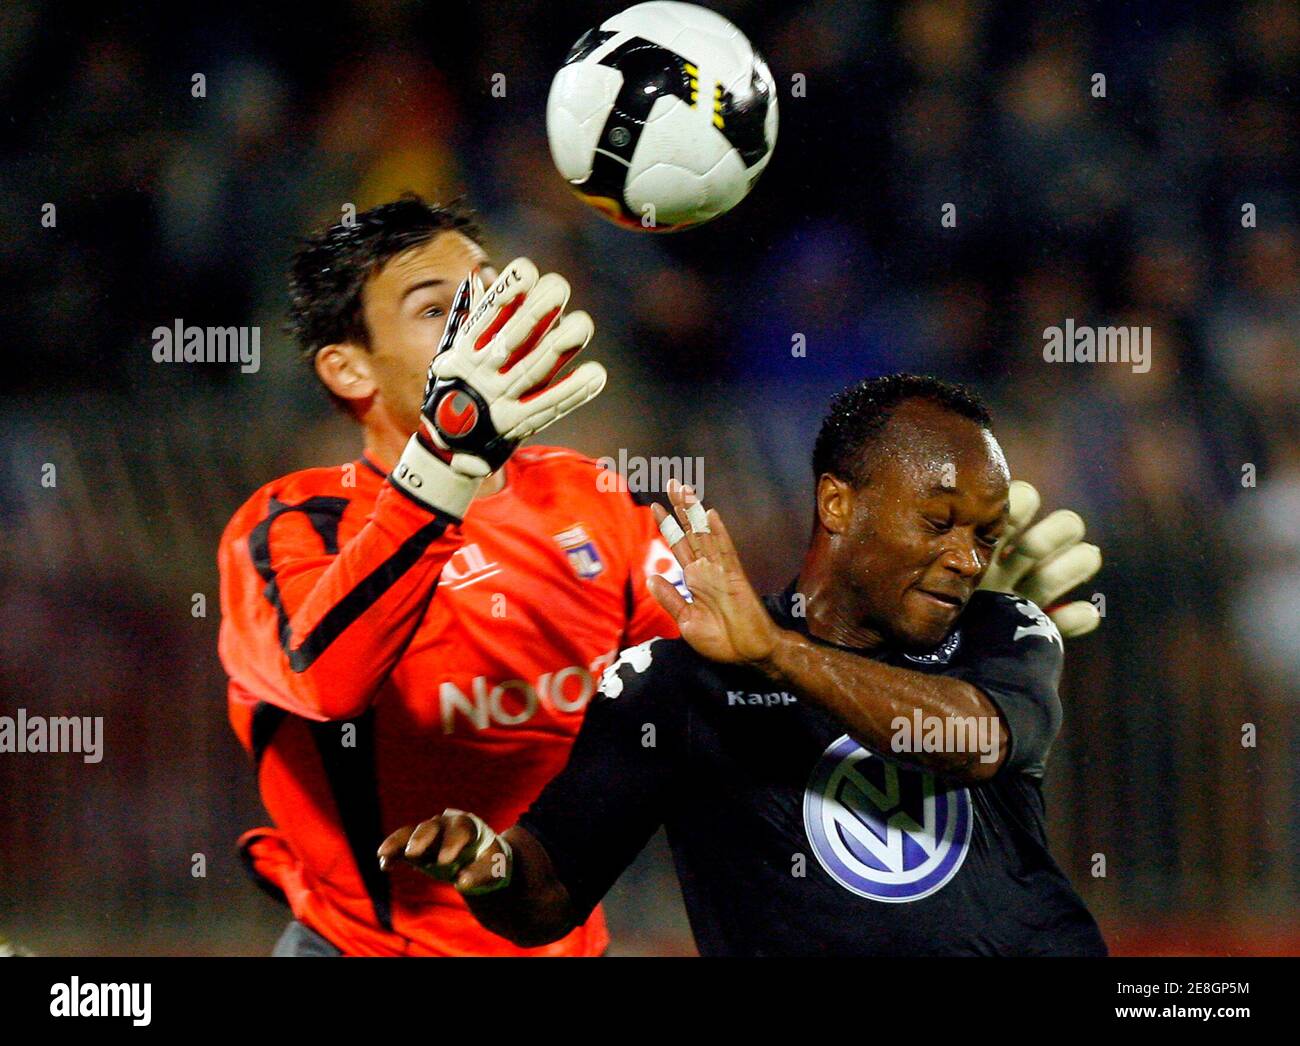 Olympique Lyon's goalkeeper Hugo Lloris (L) jumps for the ball with Partizan's Almami Moreira during their friendly soccer match in Belgrade July 23, 2008.  REUTERS/Ivan Milutinovic  (SERBIA) Stock Photo